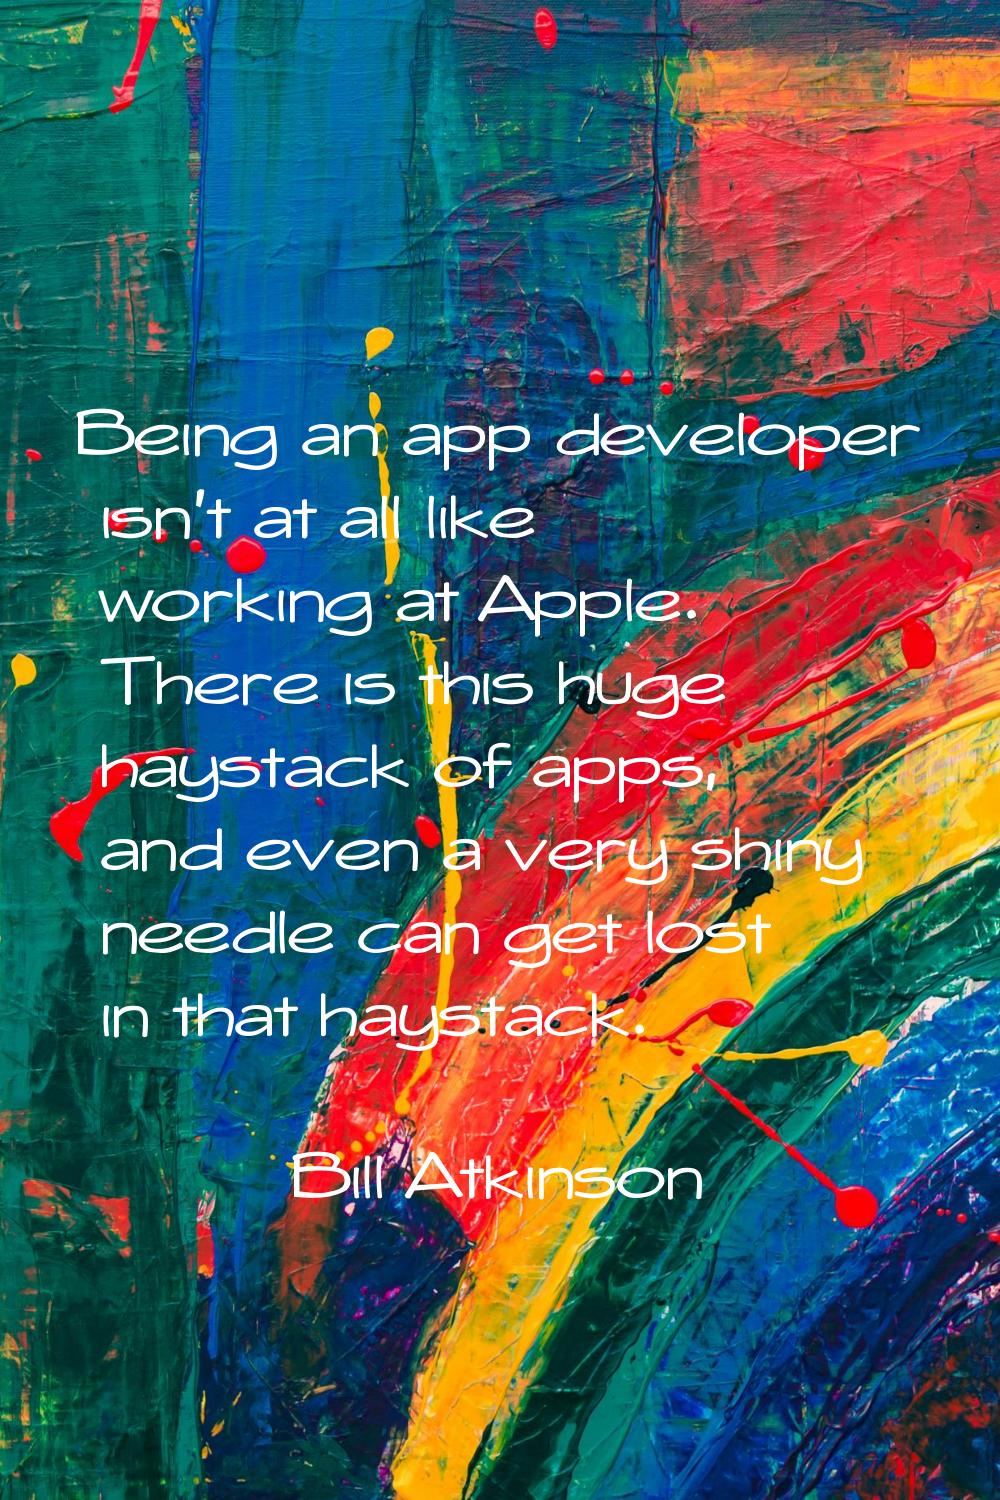 Being an app developer isn't at all like working at Apple. There is this huge haystack of apps, and